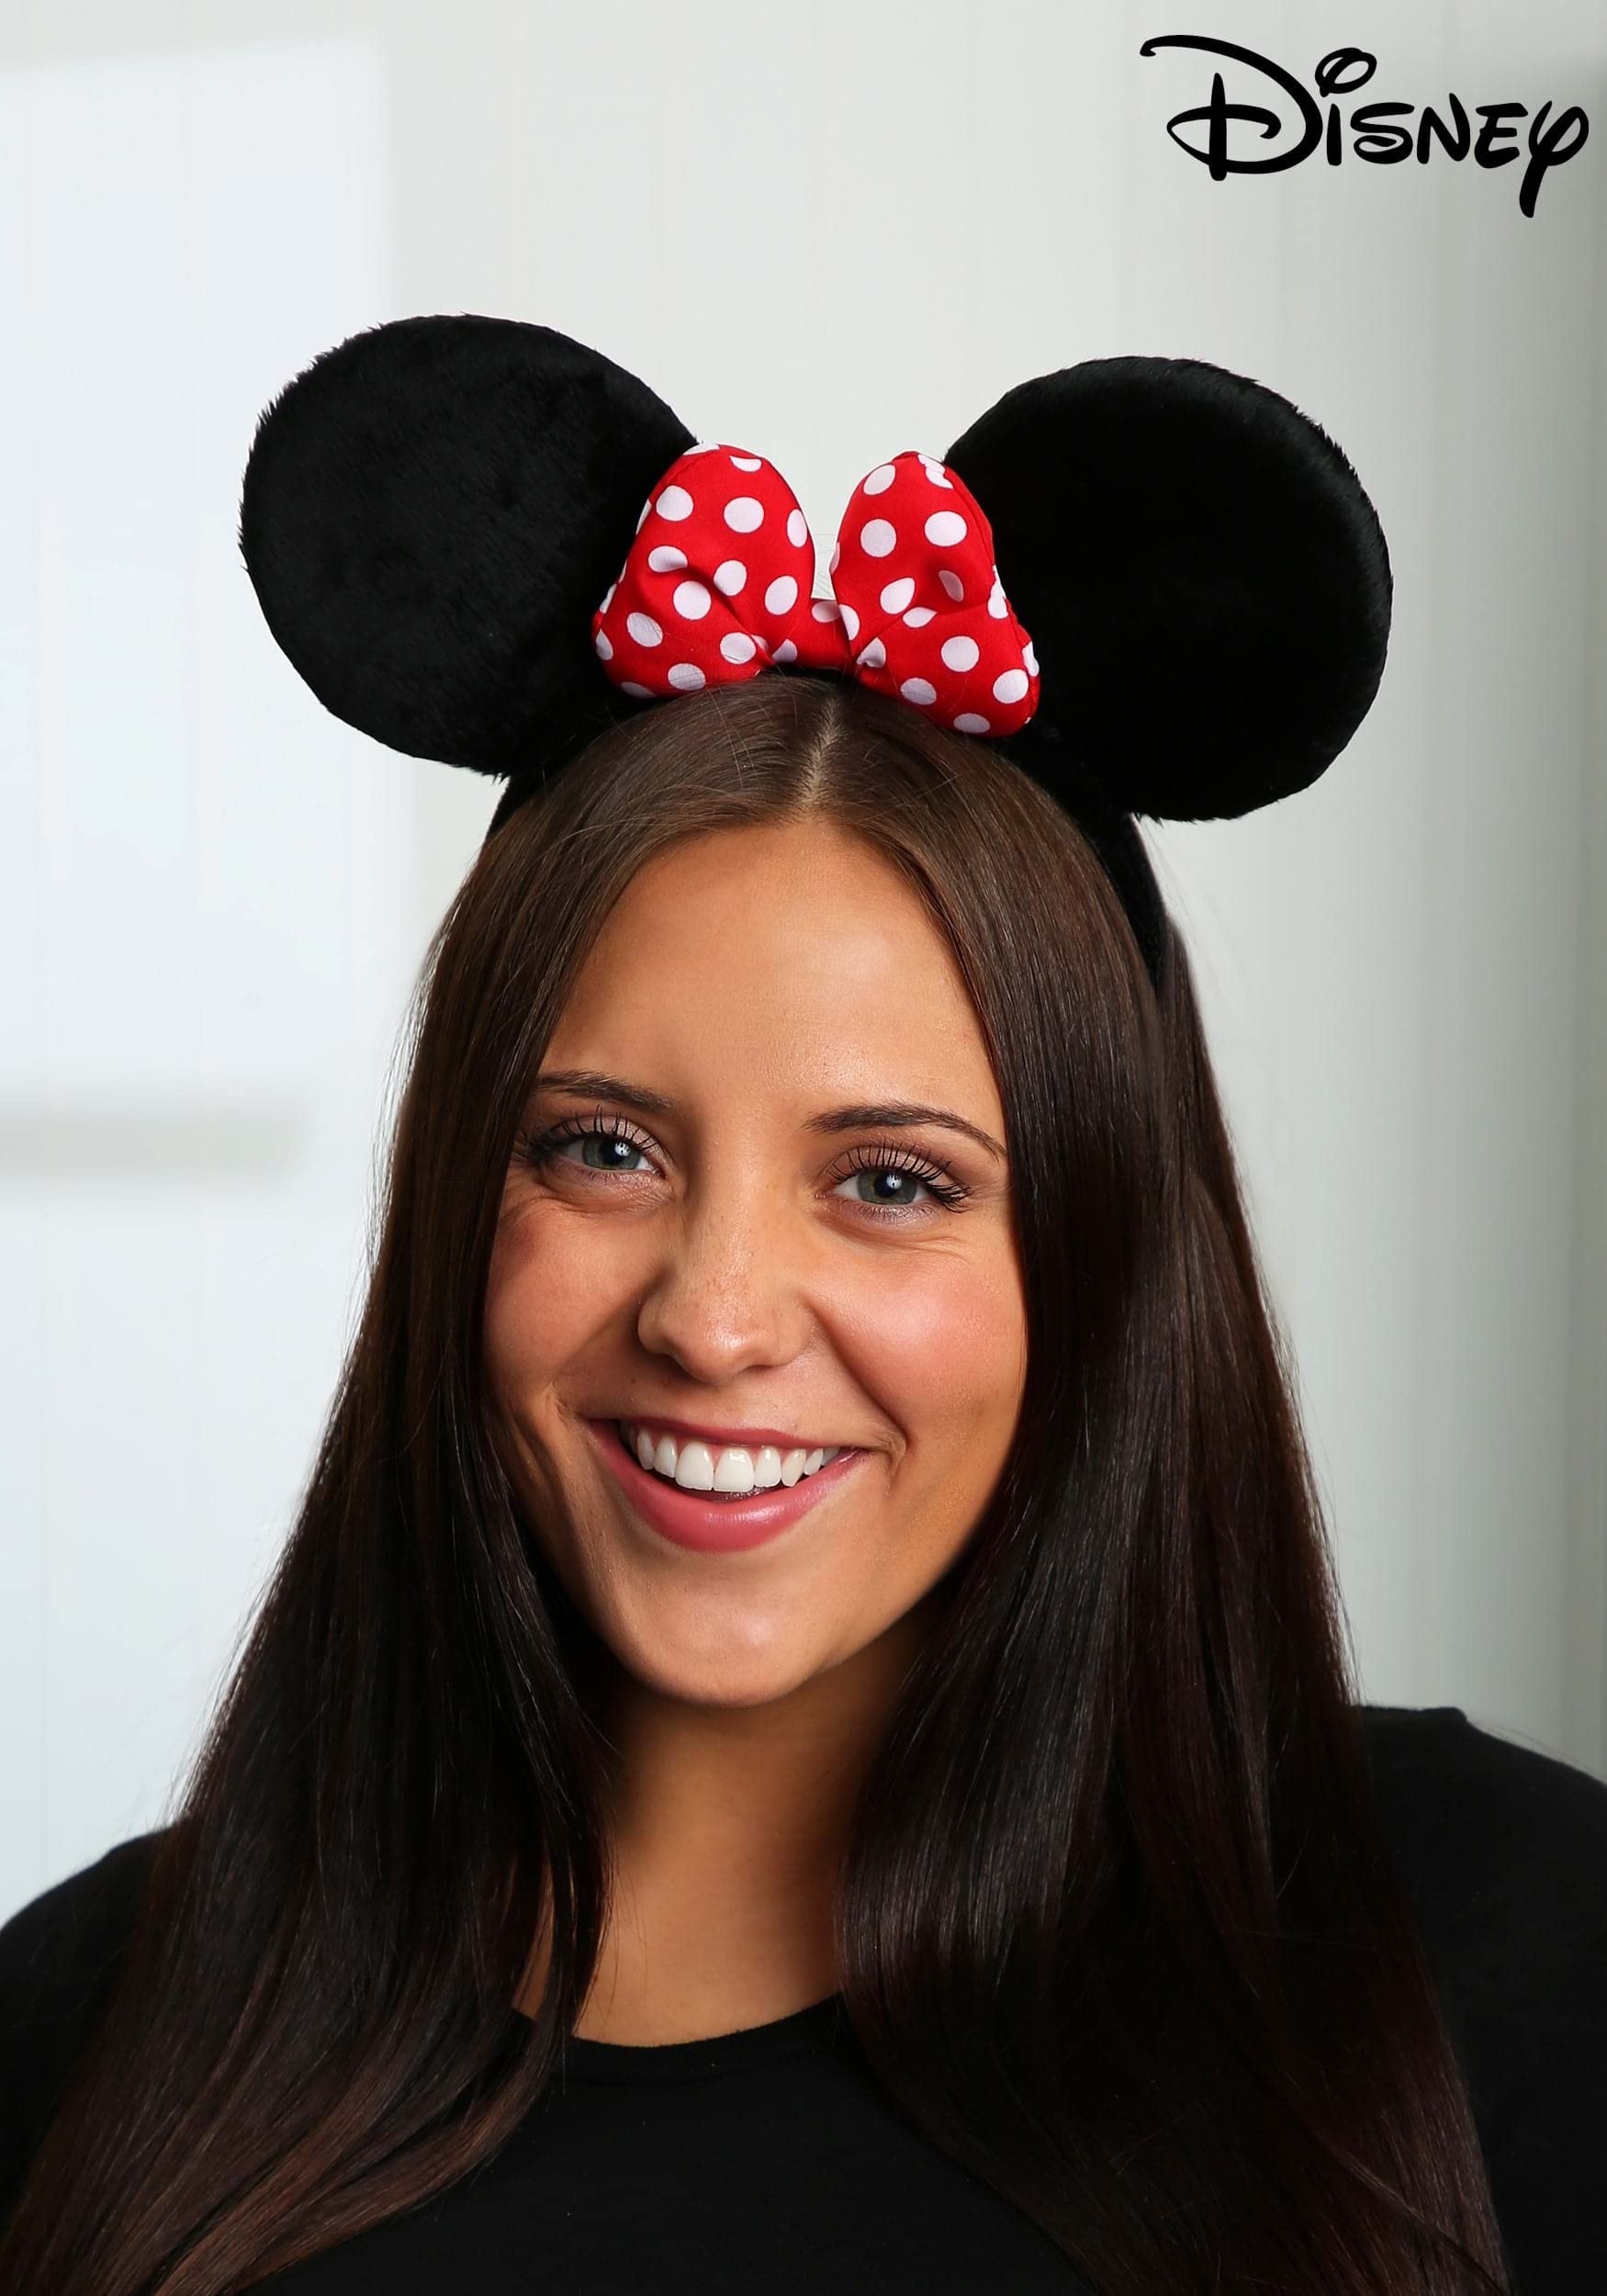 Disney's Minnie Mouse Ears by elope